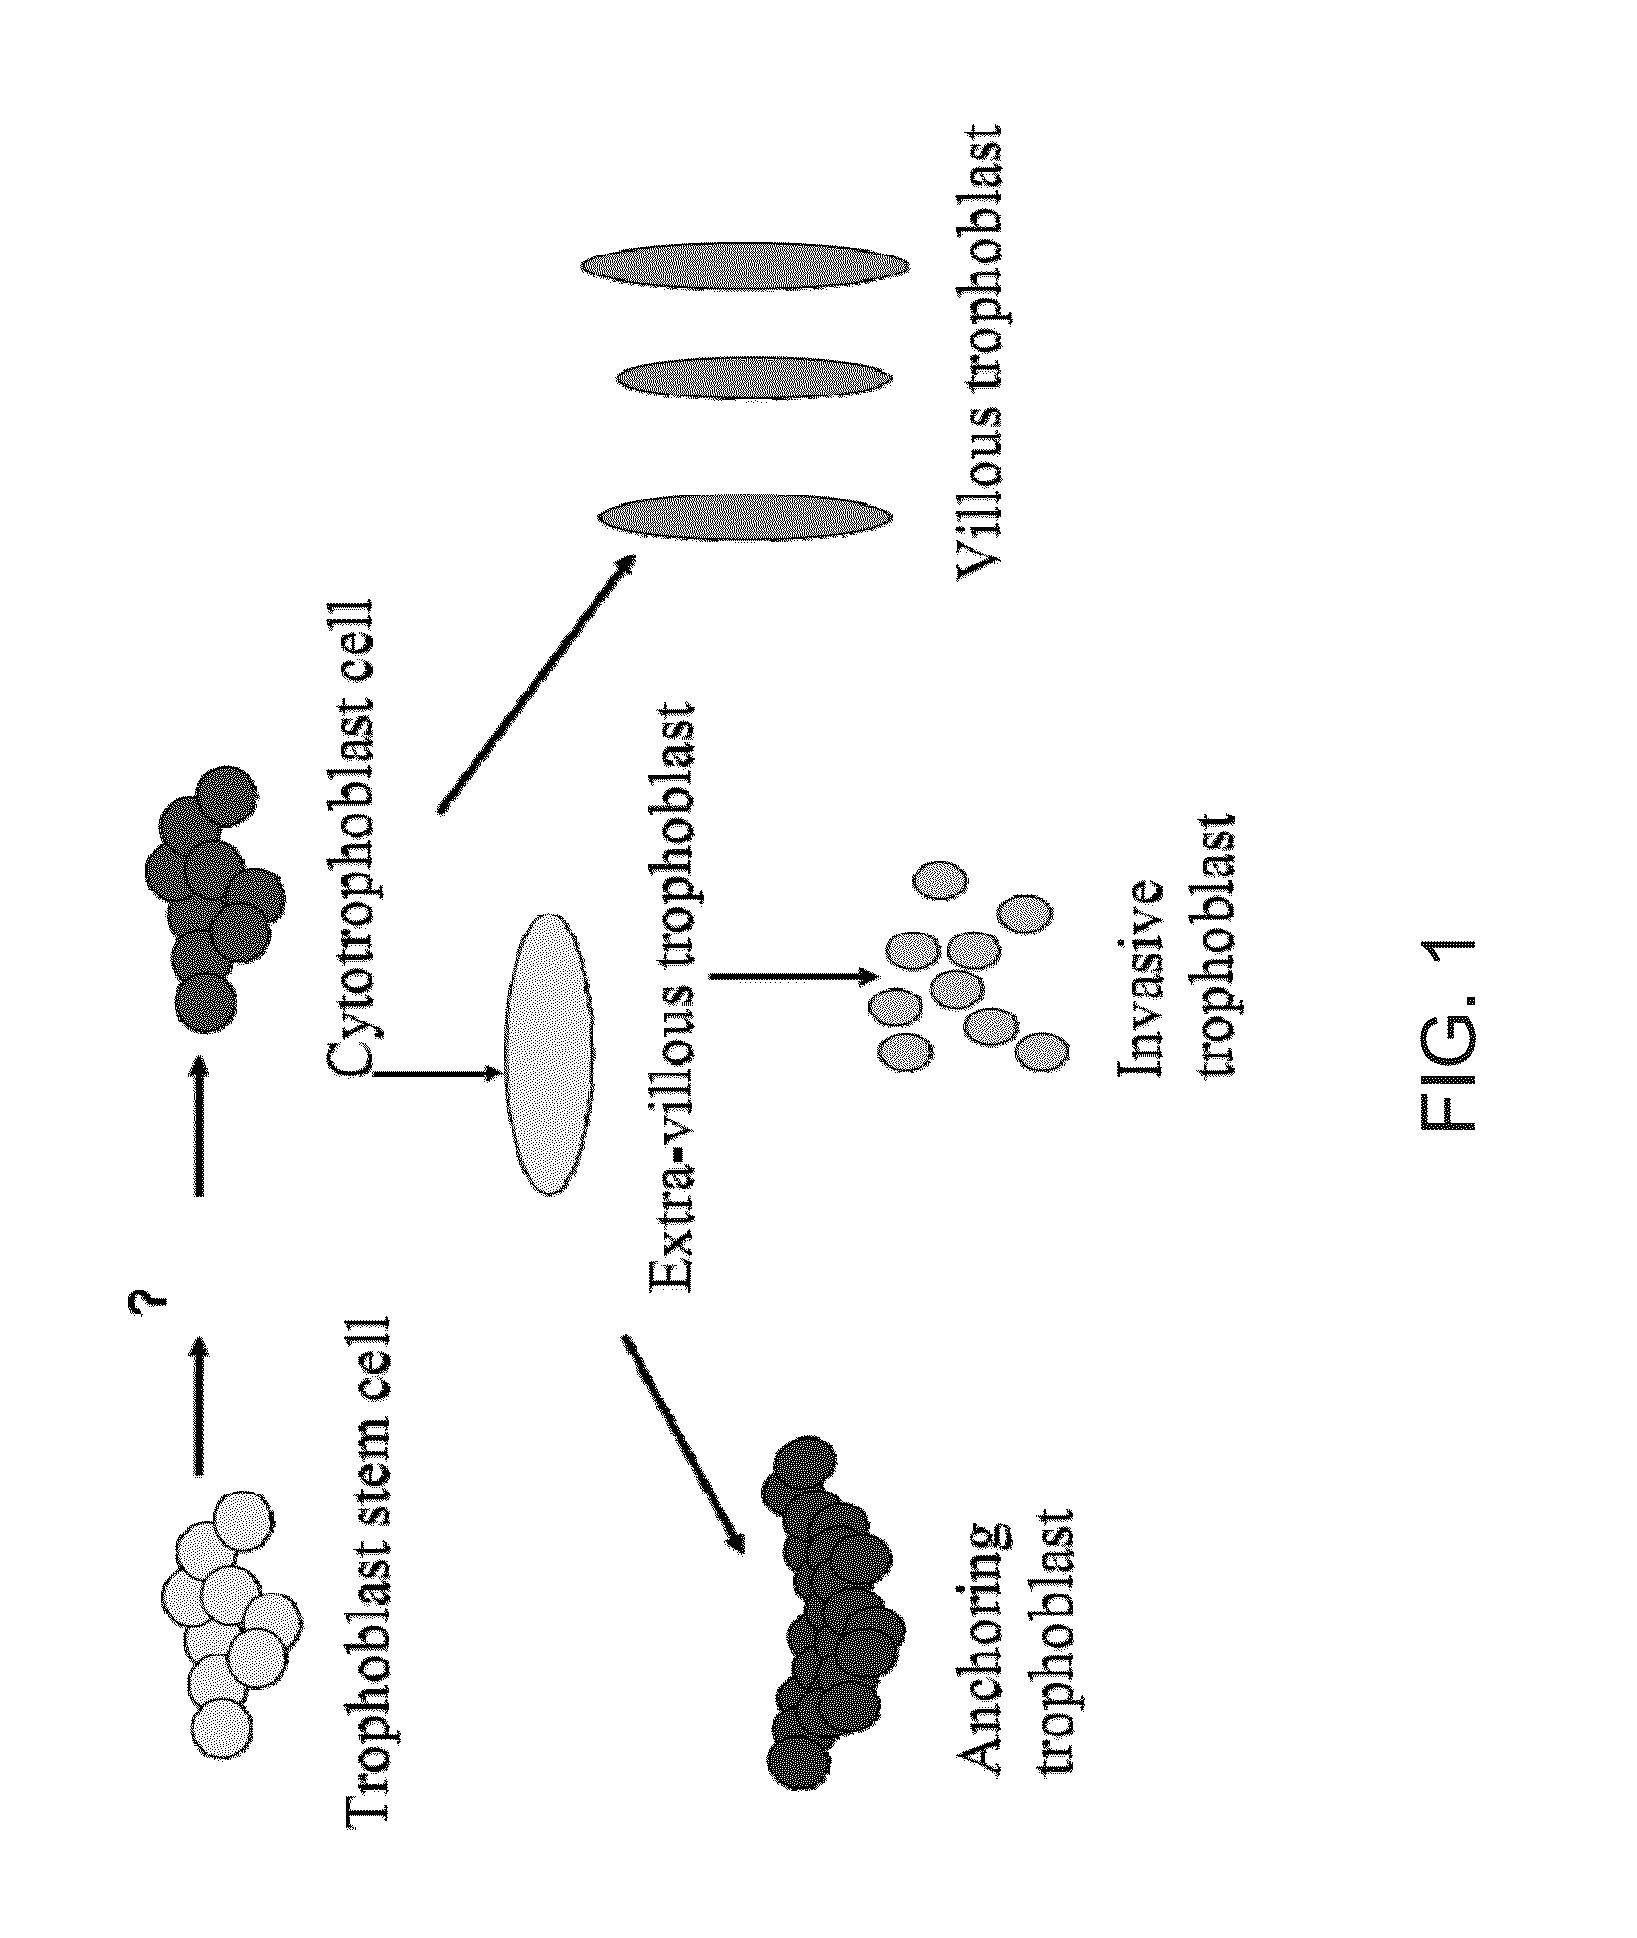 De Novo Anembryonic Trophoblast Vesicles and Methods of Making and Using Them